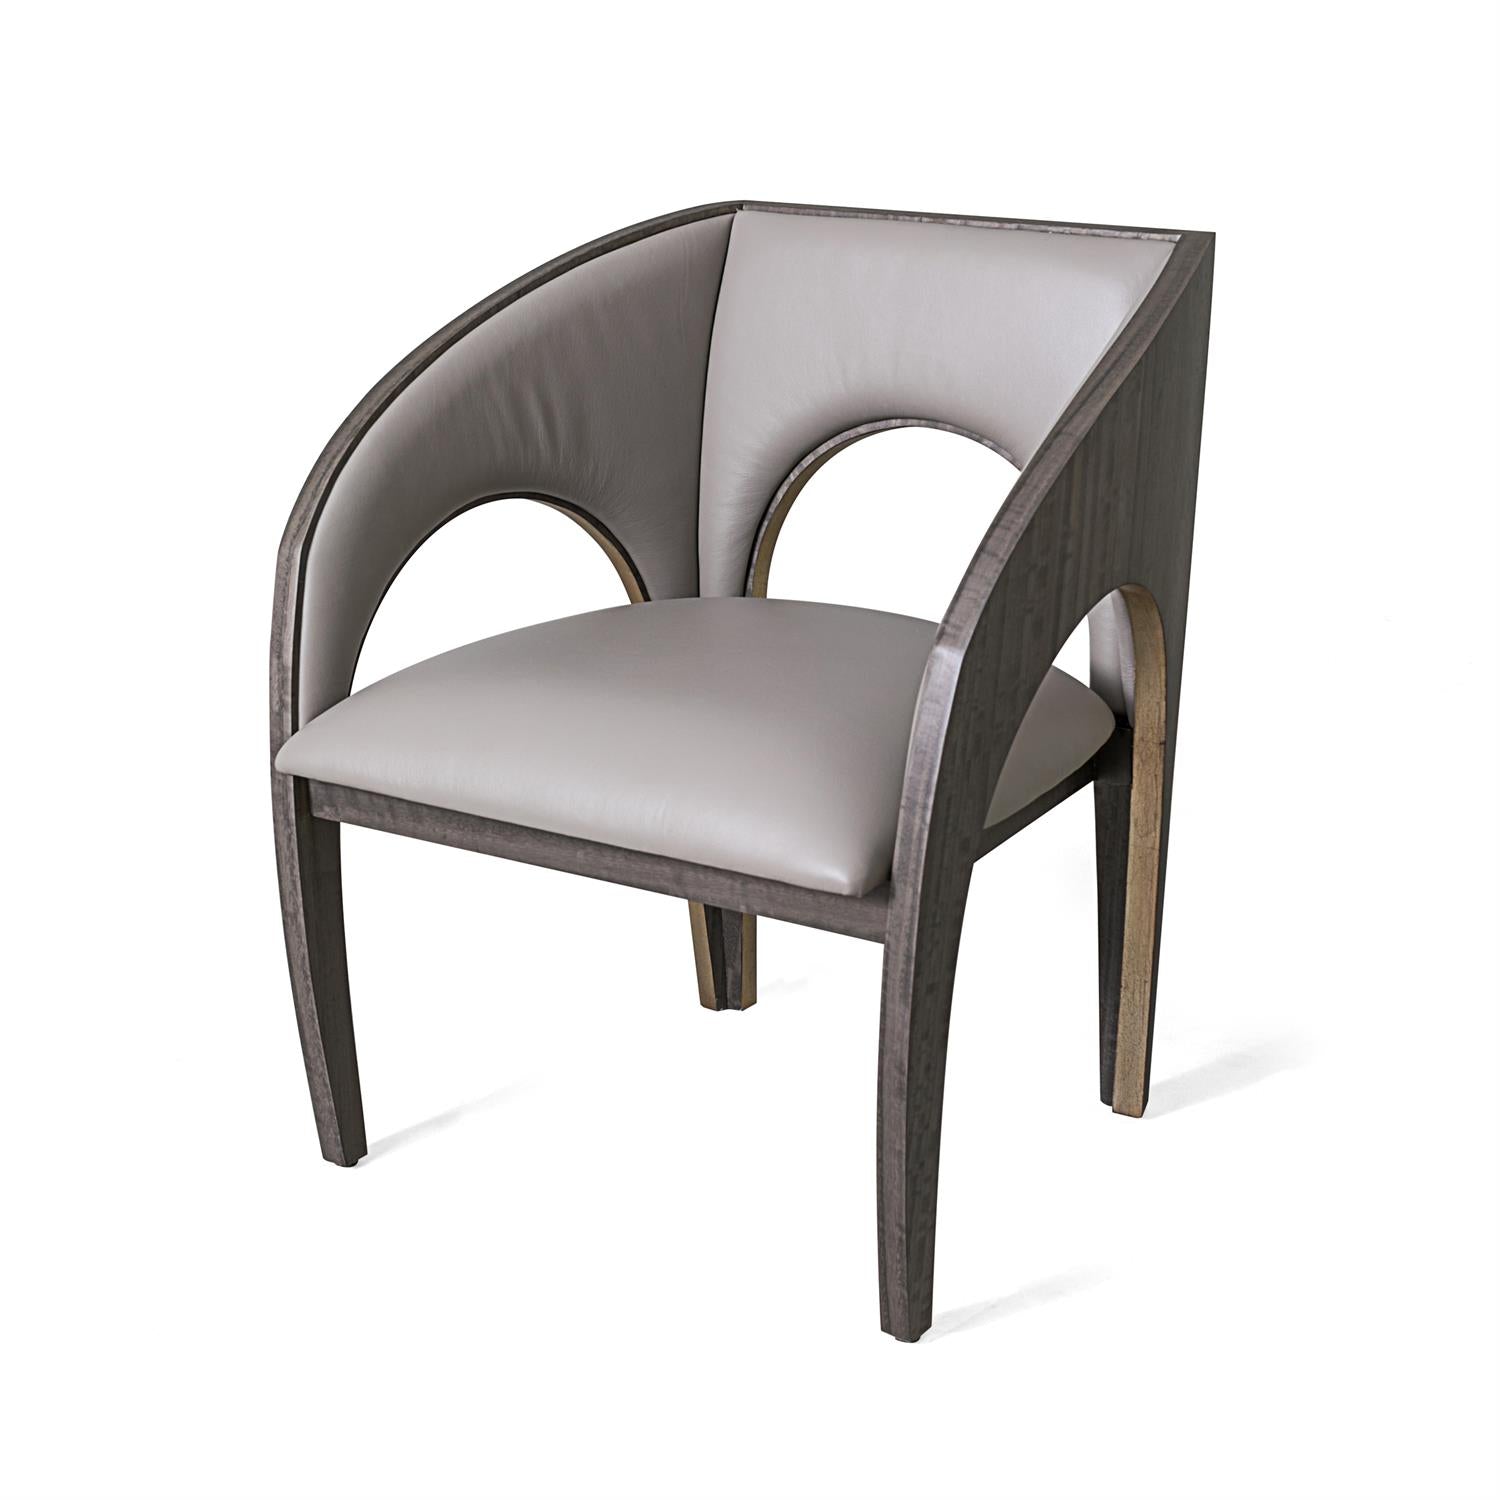 Global Views, Arches Dining Chair - Grey Leather